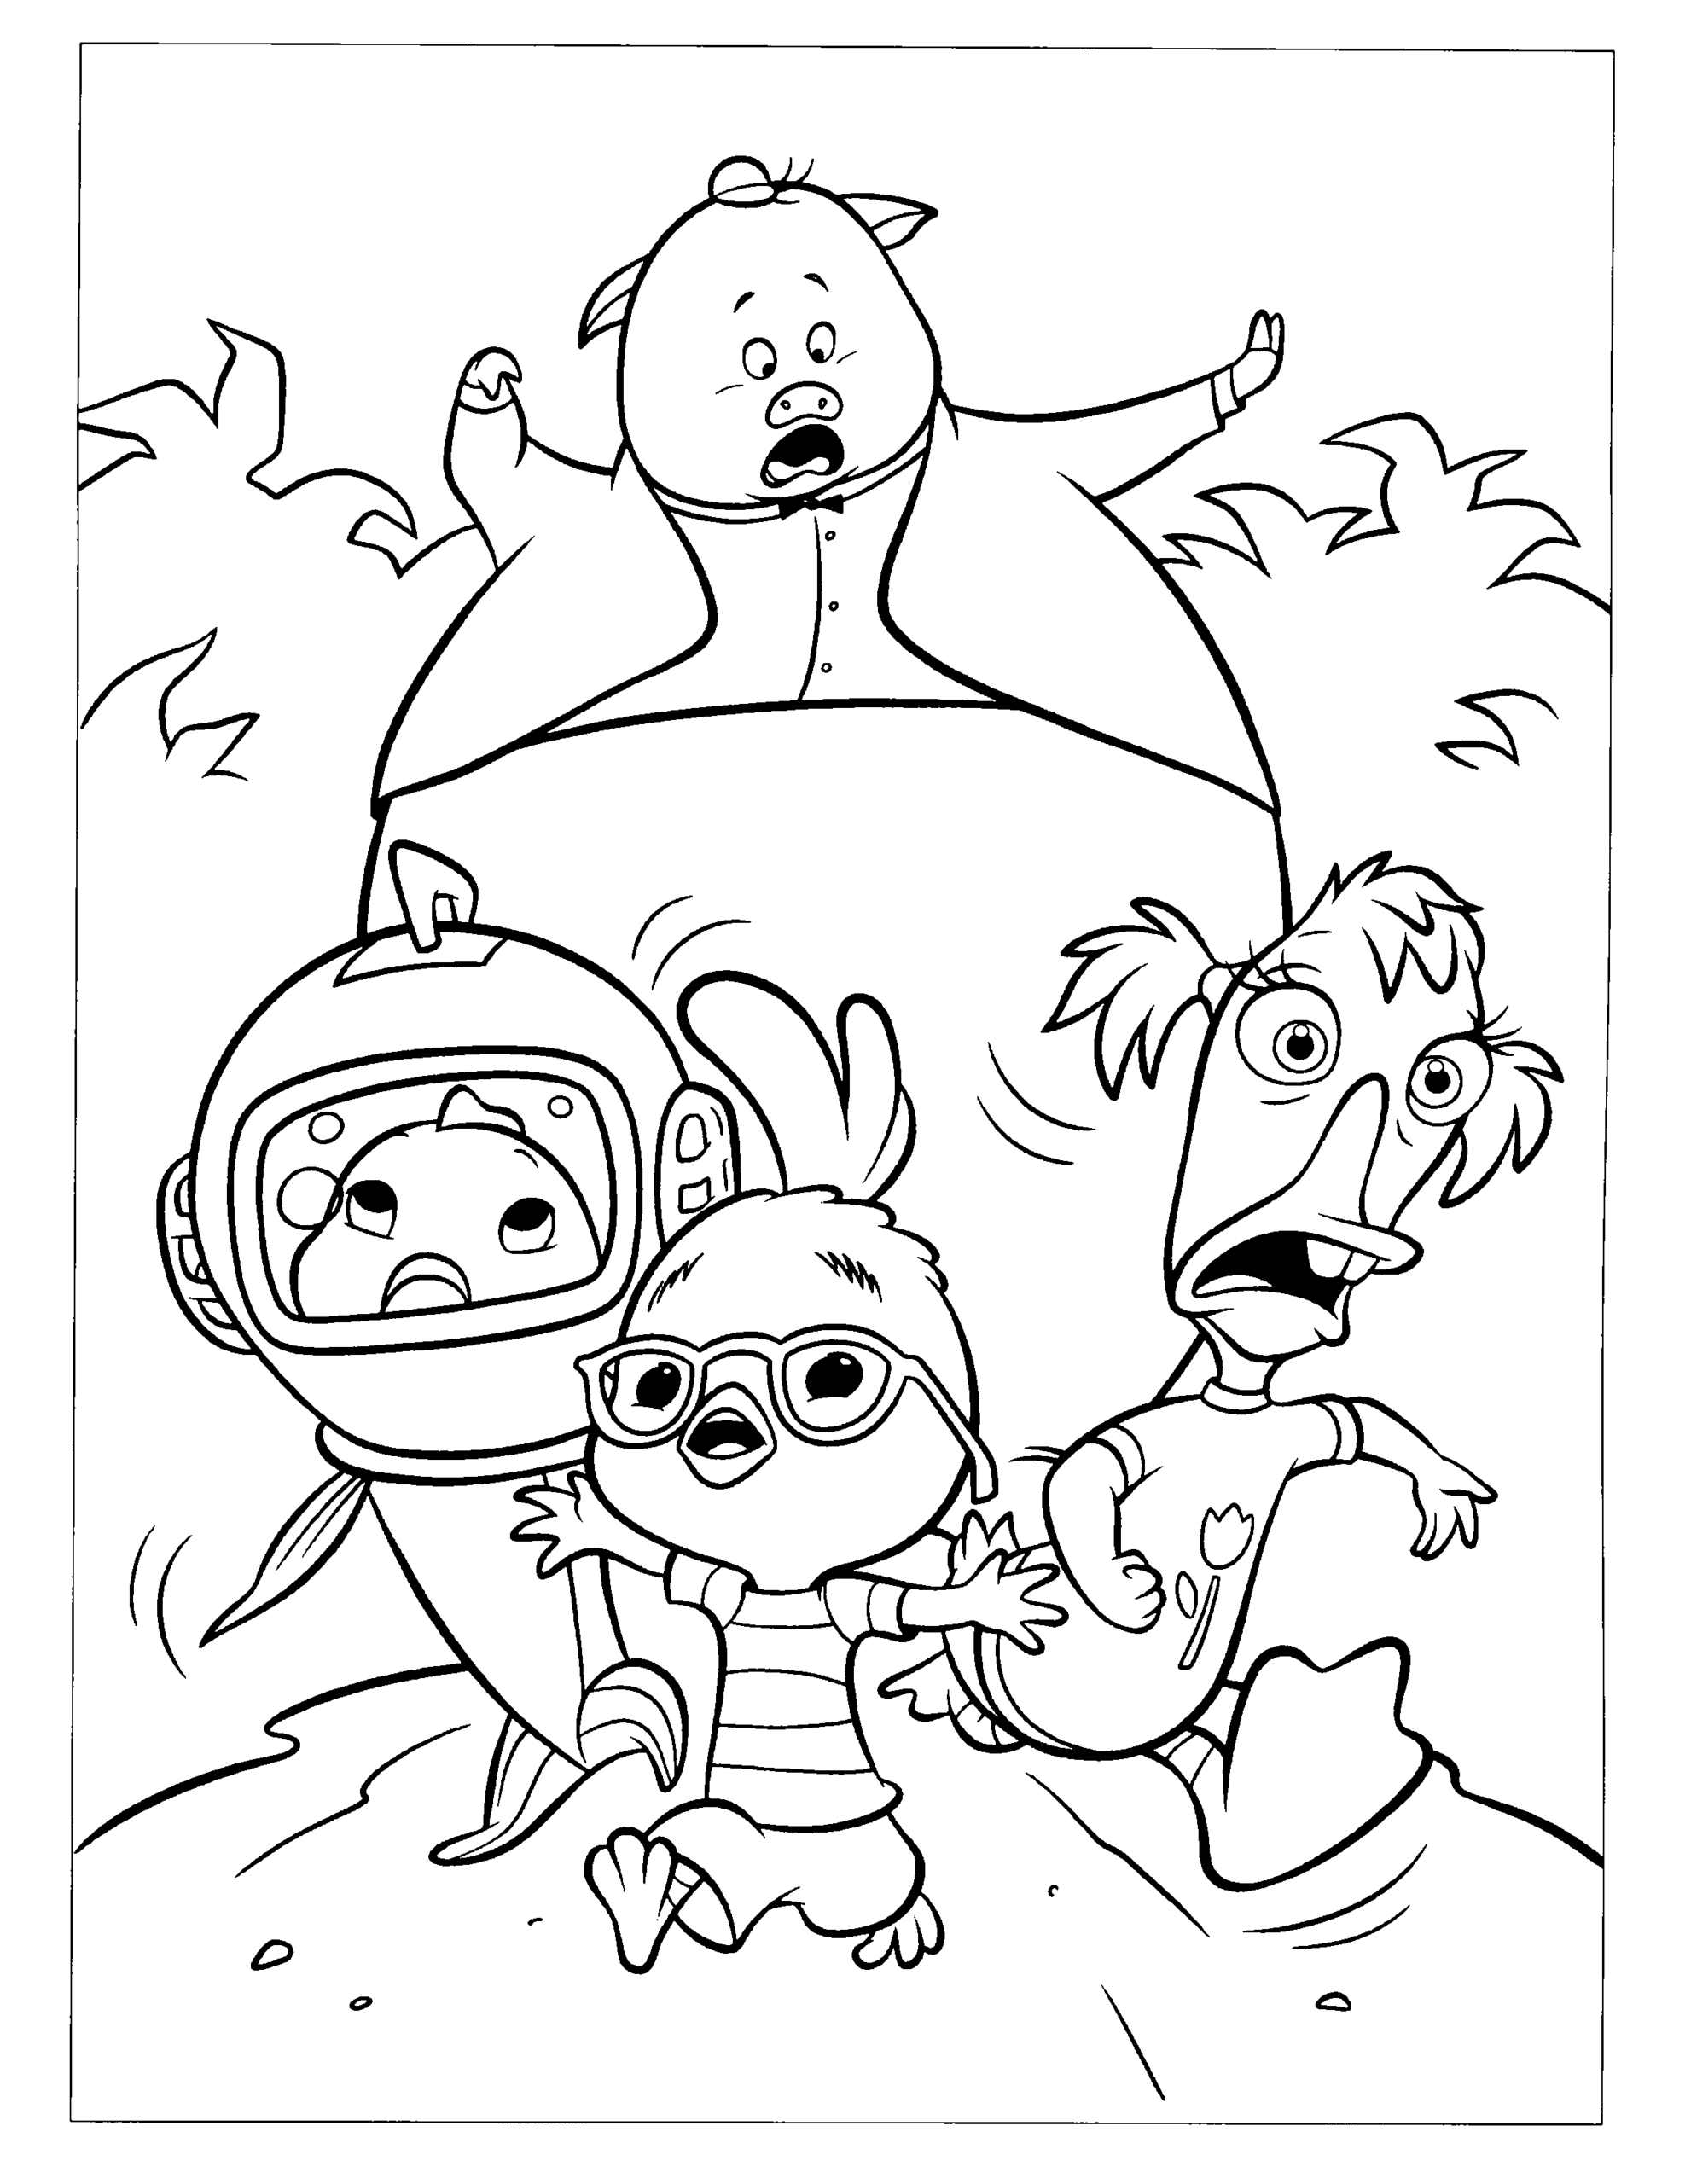 Chicken Little Coloring Pages TV Film chicken little 4 Printable 2020 02089 Coloring4free